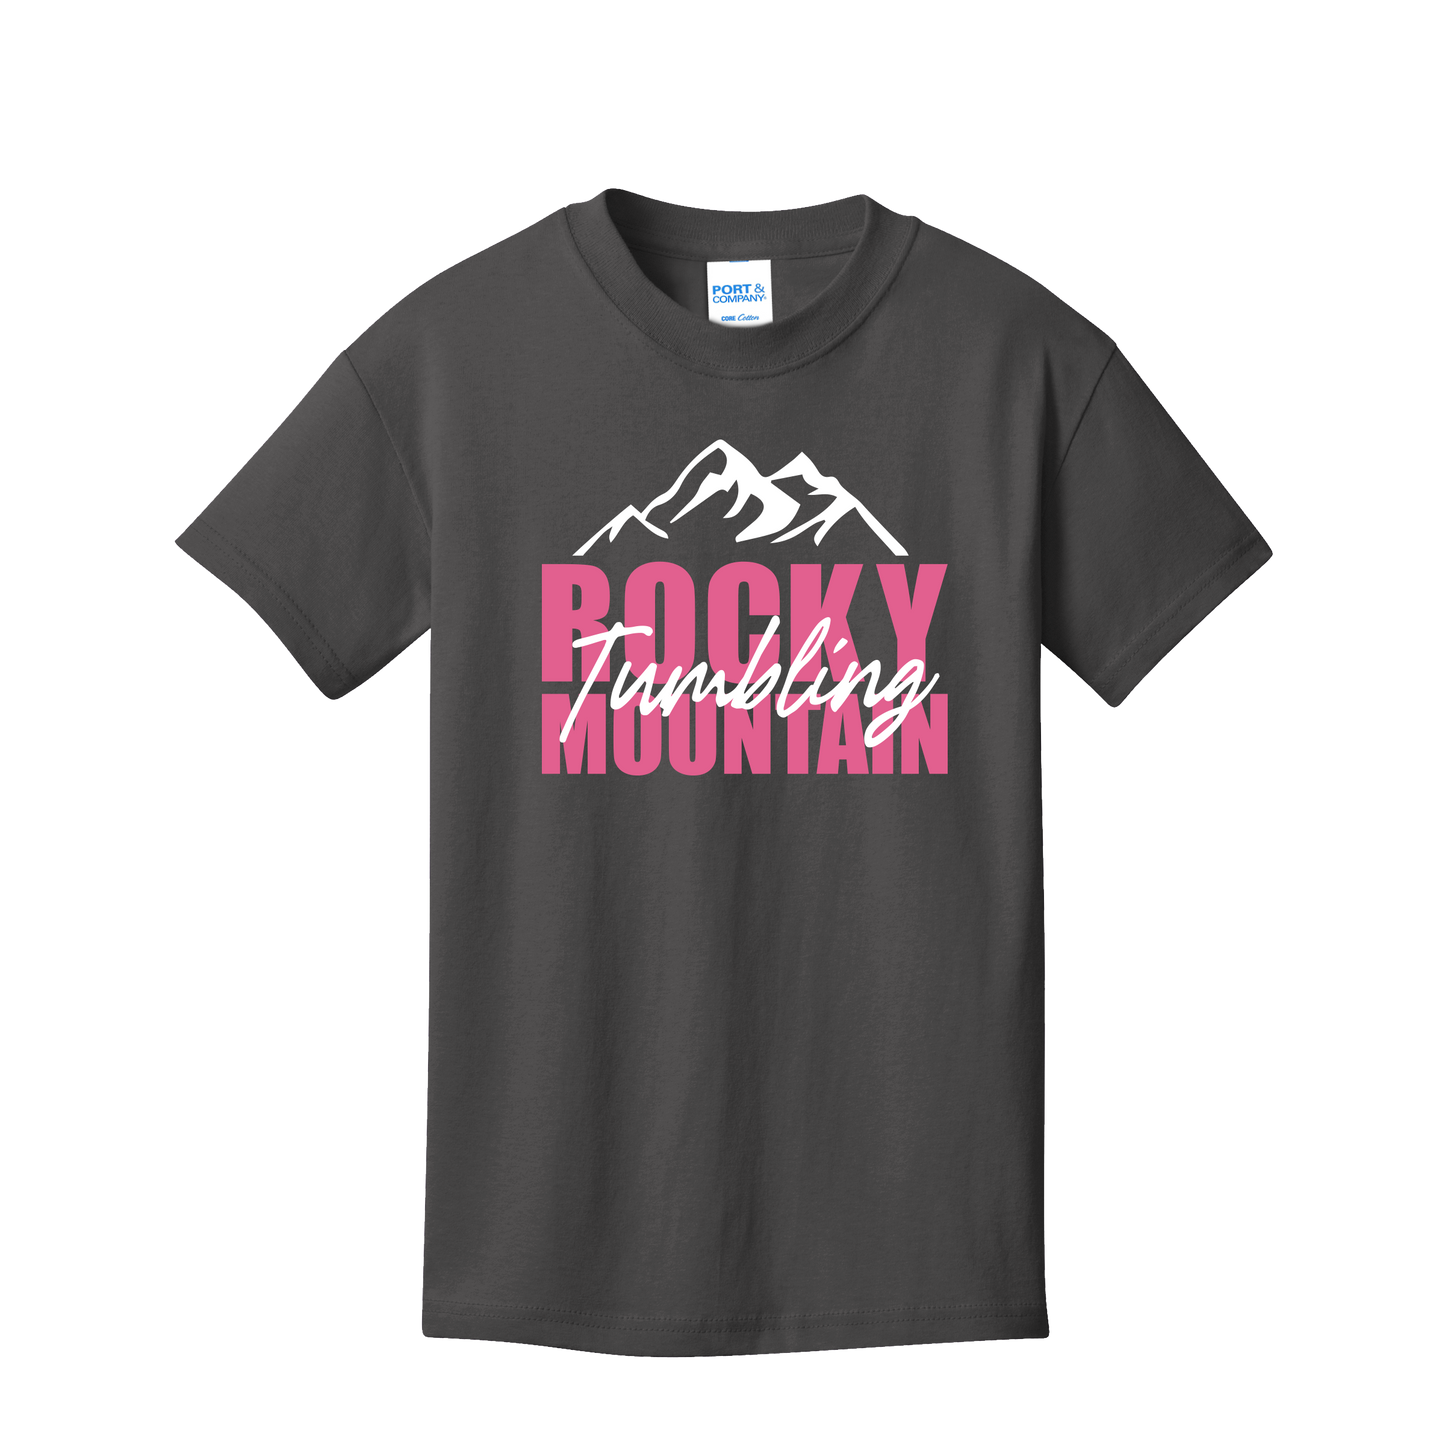 Port & Company® Core Cotton unisex all ages Tee - Mountain